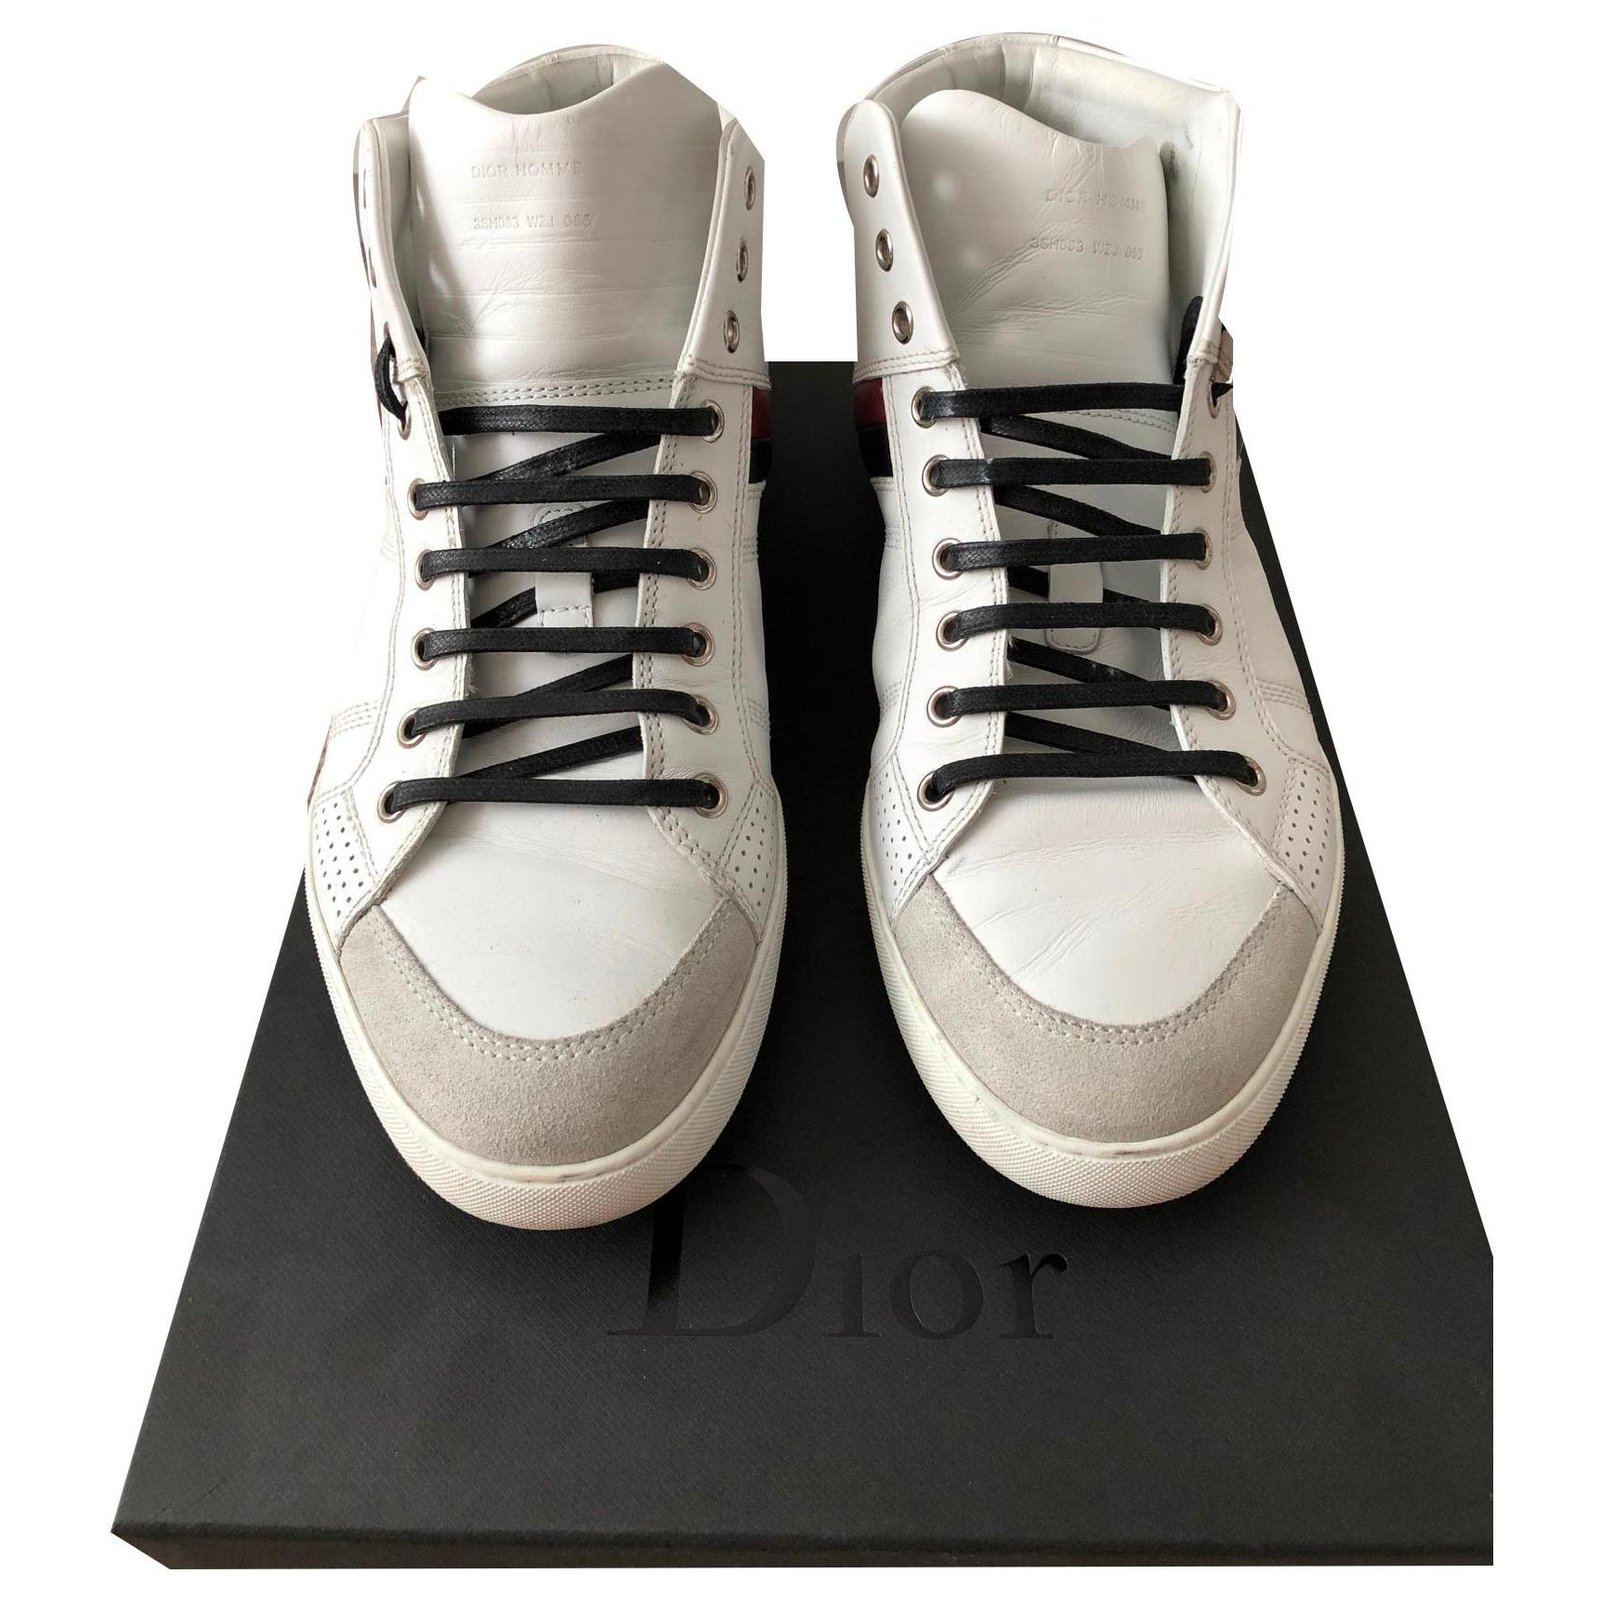 christian dior sneakers price